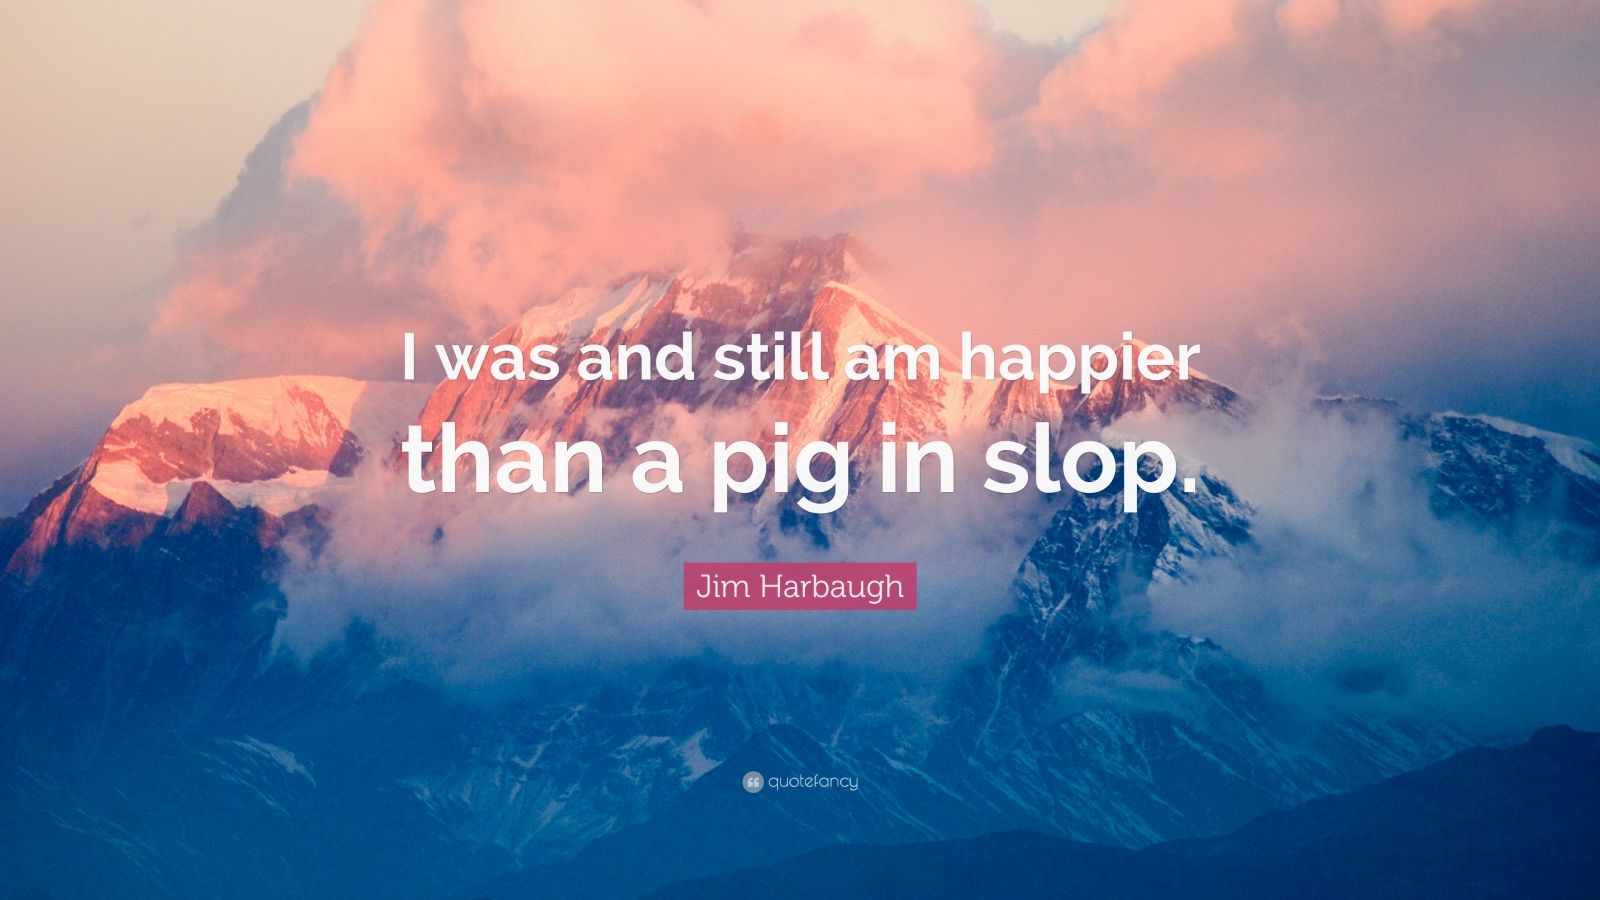 Jim Harbaugh Quote: "I was and still am happier than a pig ...